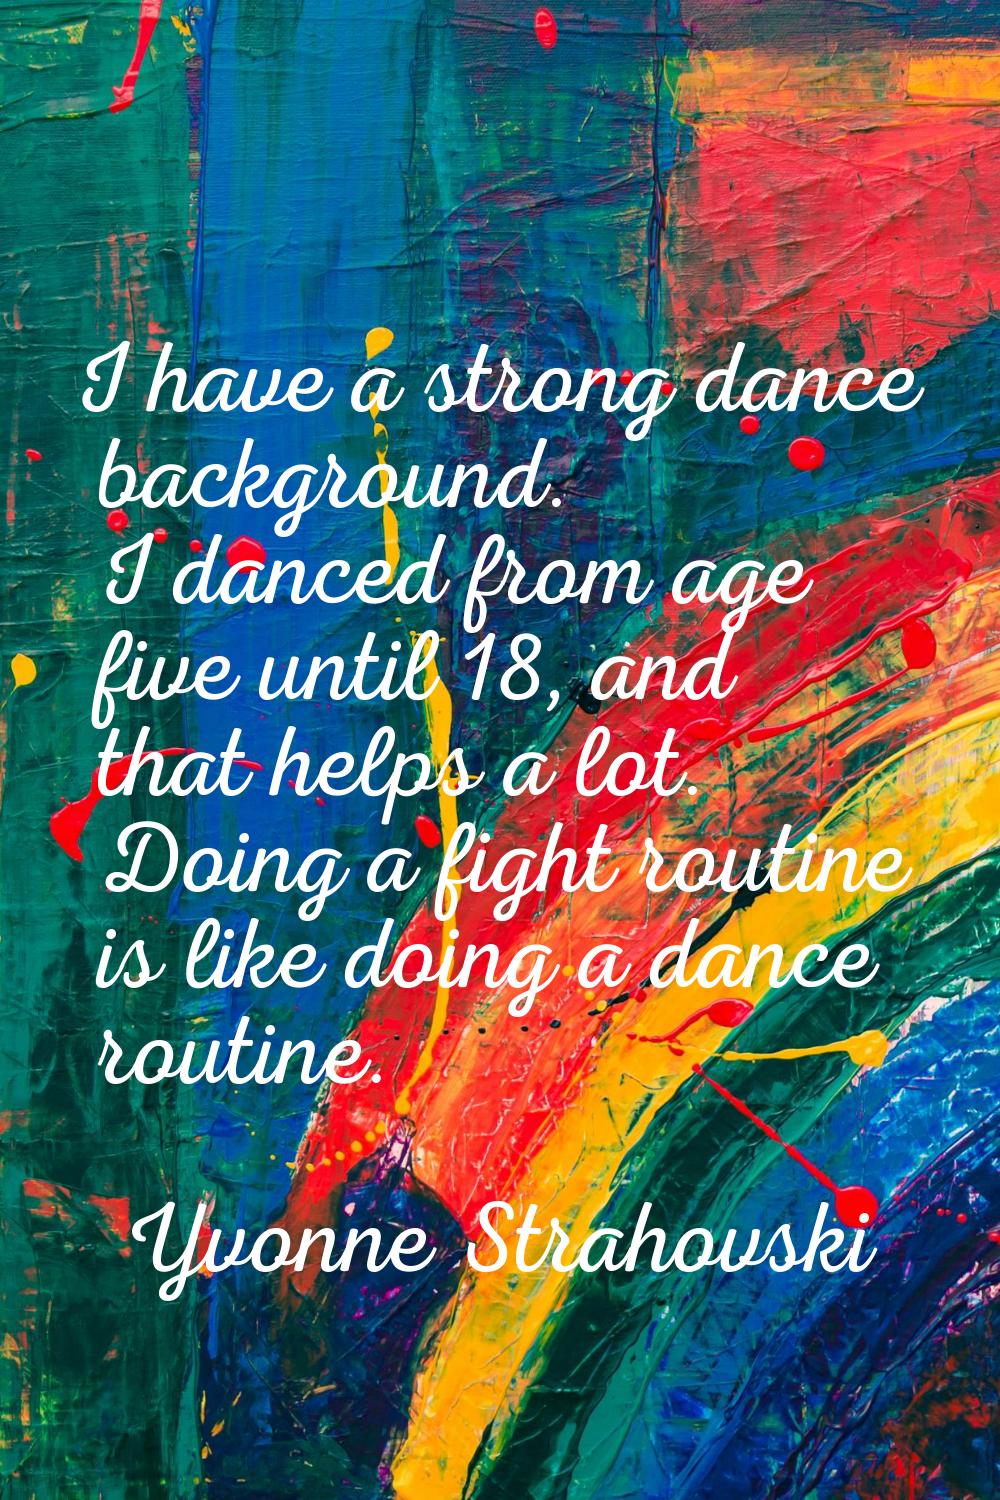 I have a strong dance background. I danced from age five until 18, and that helps a lot. Doing a fi